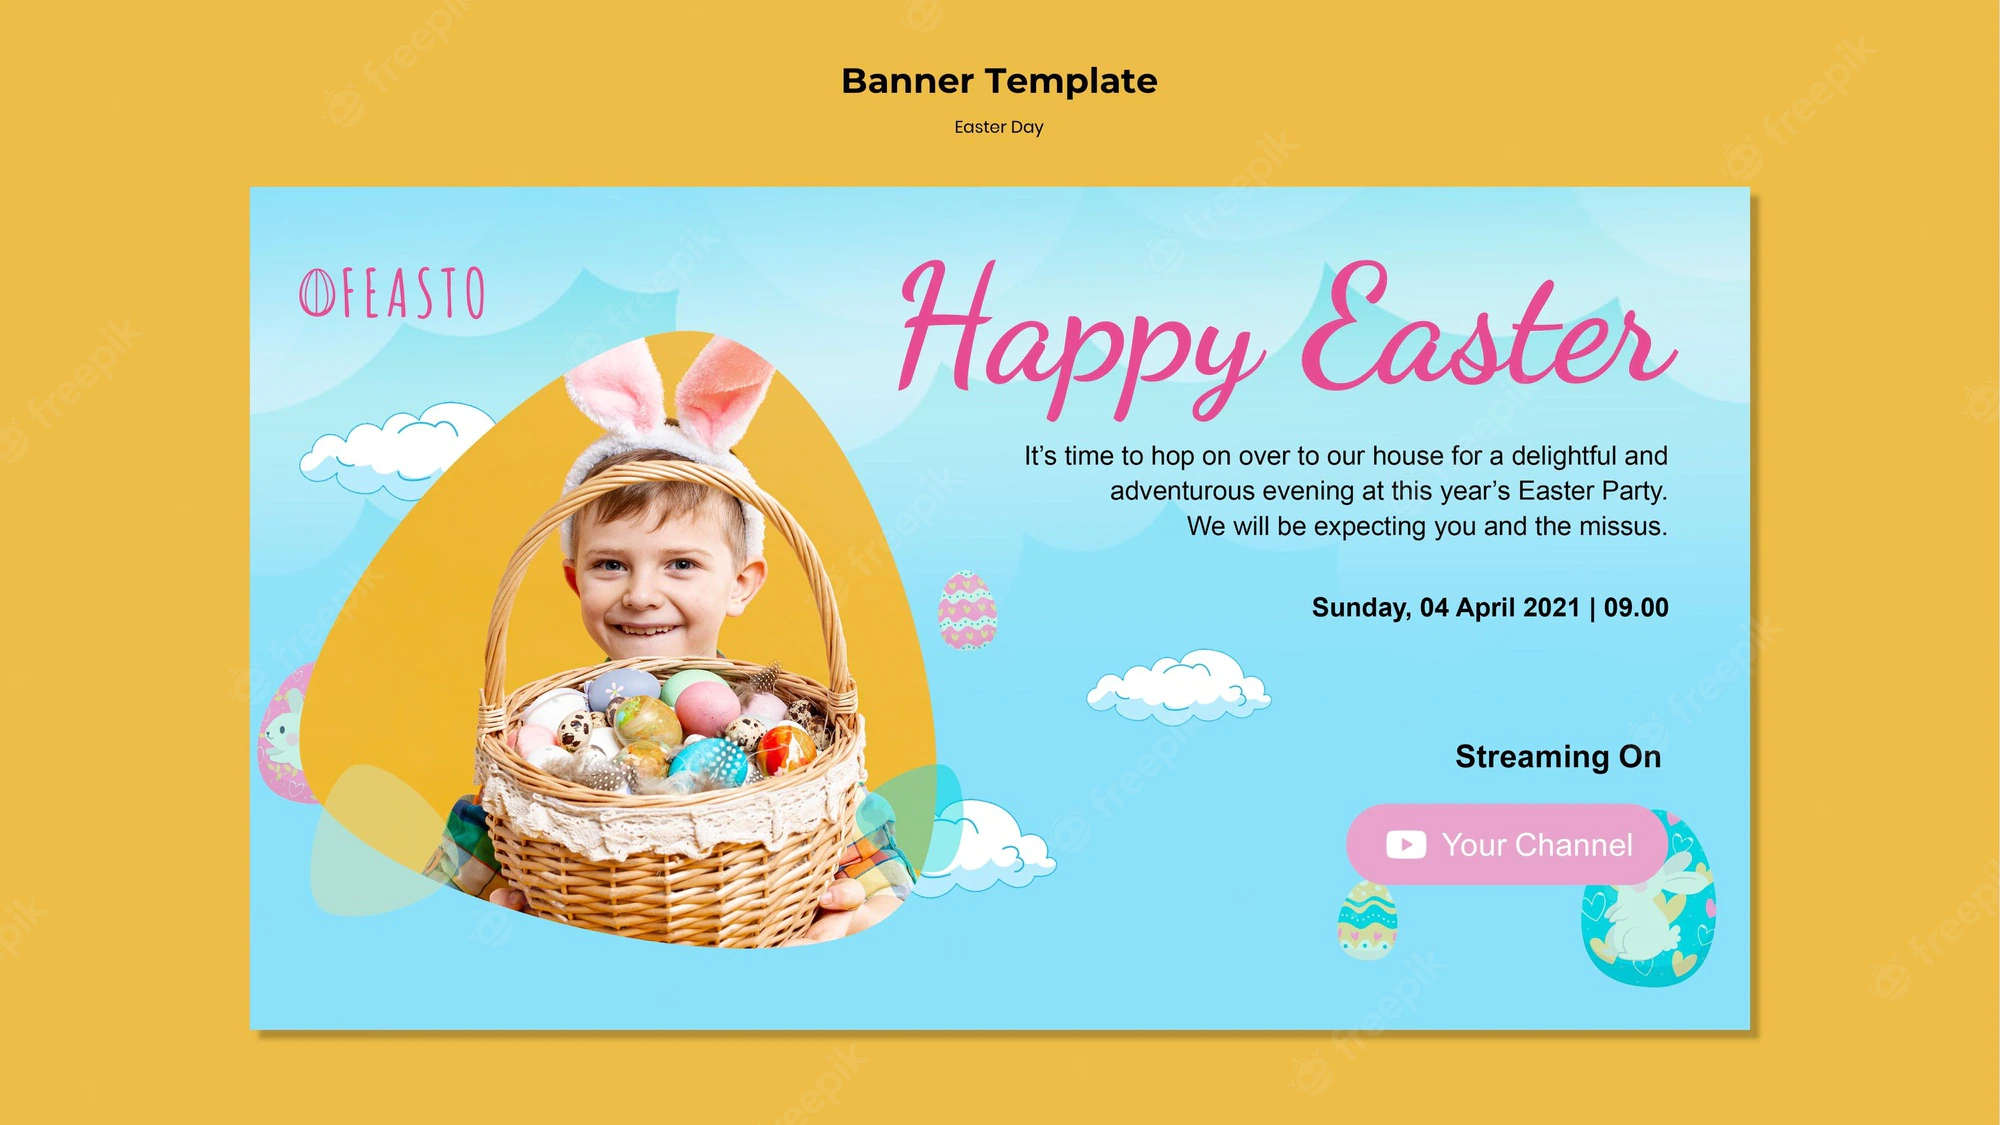 Happy Easter Banner Template 23 2148932263